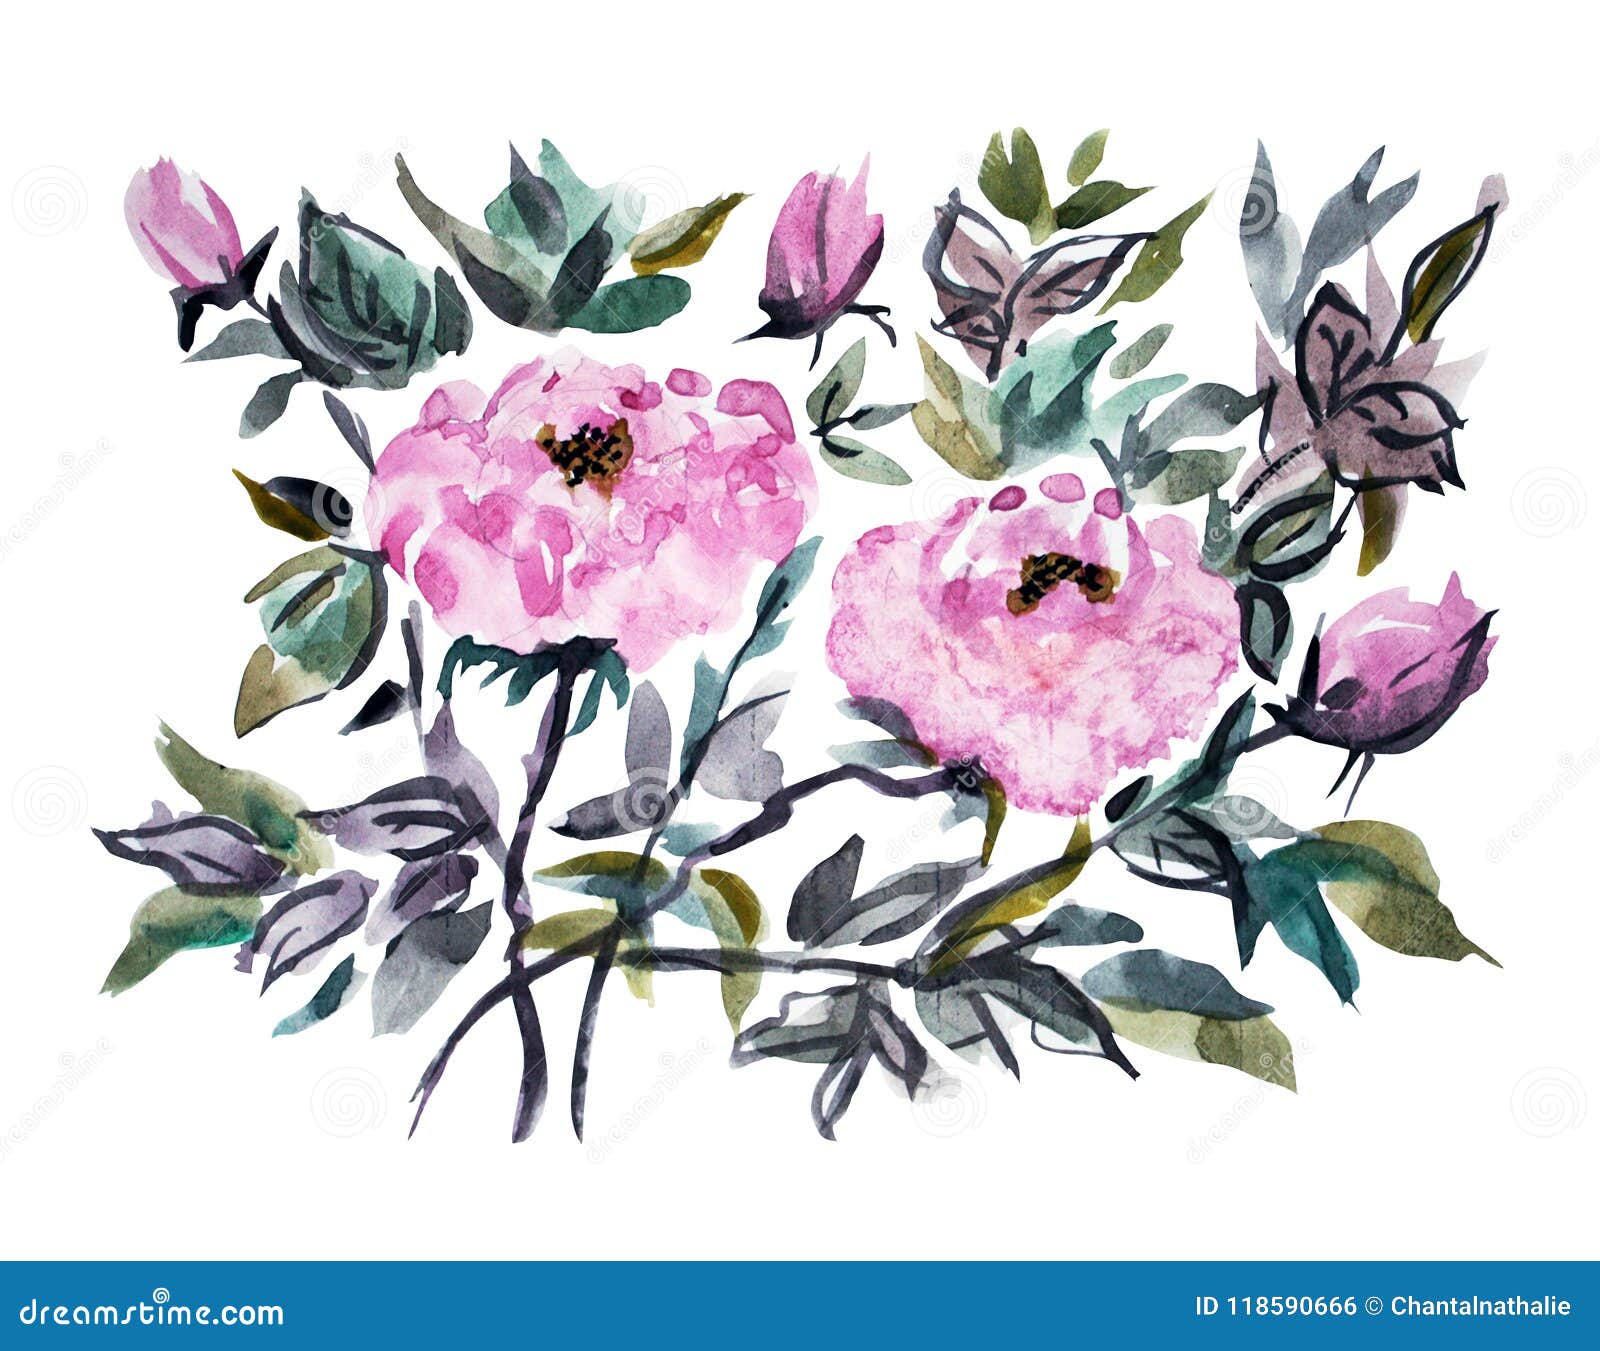 Watercolor flowers clipart stock illustration. Illustration of ...